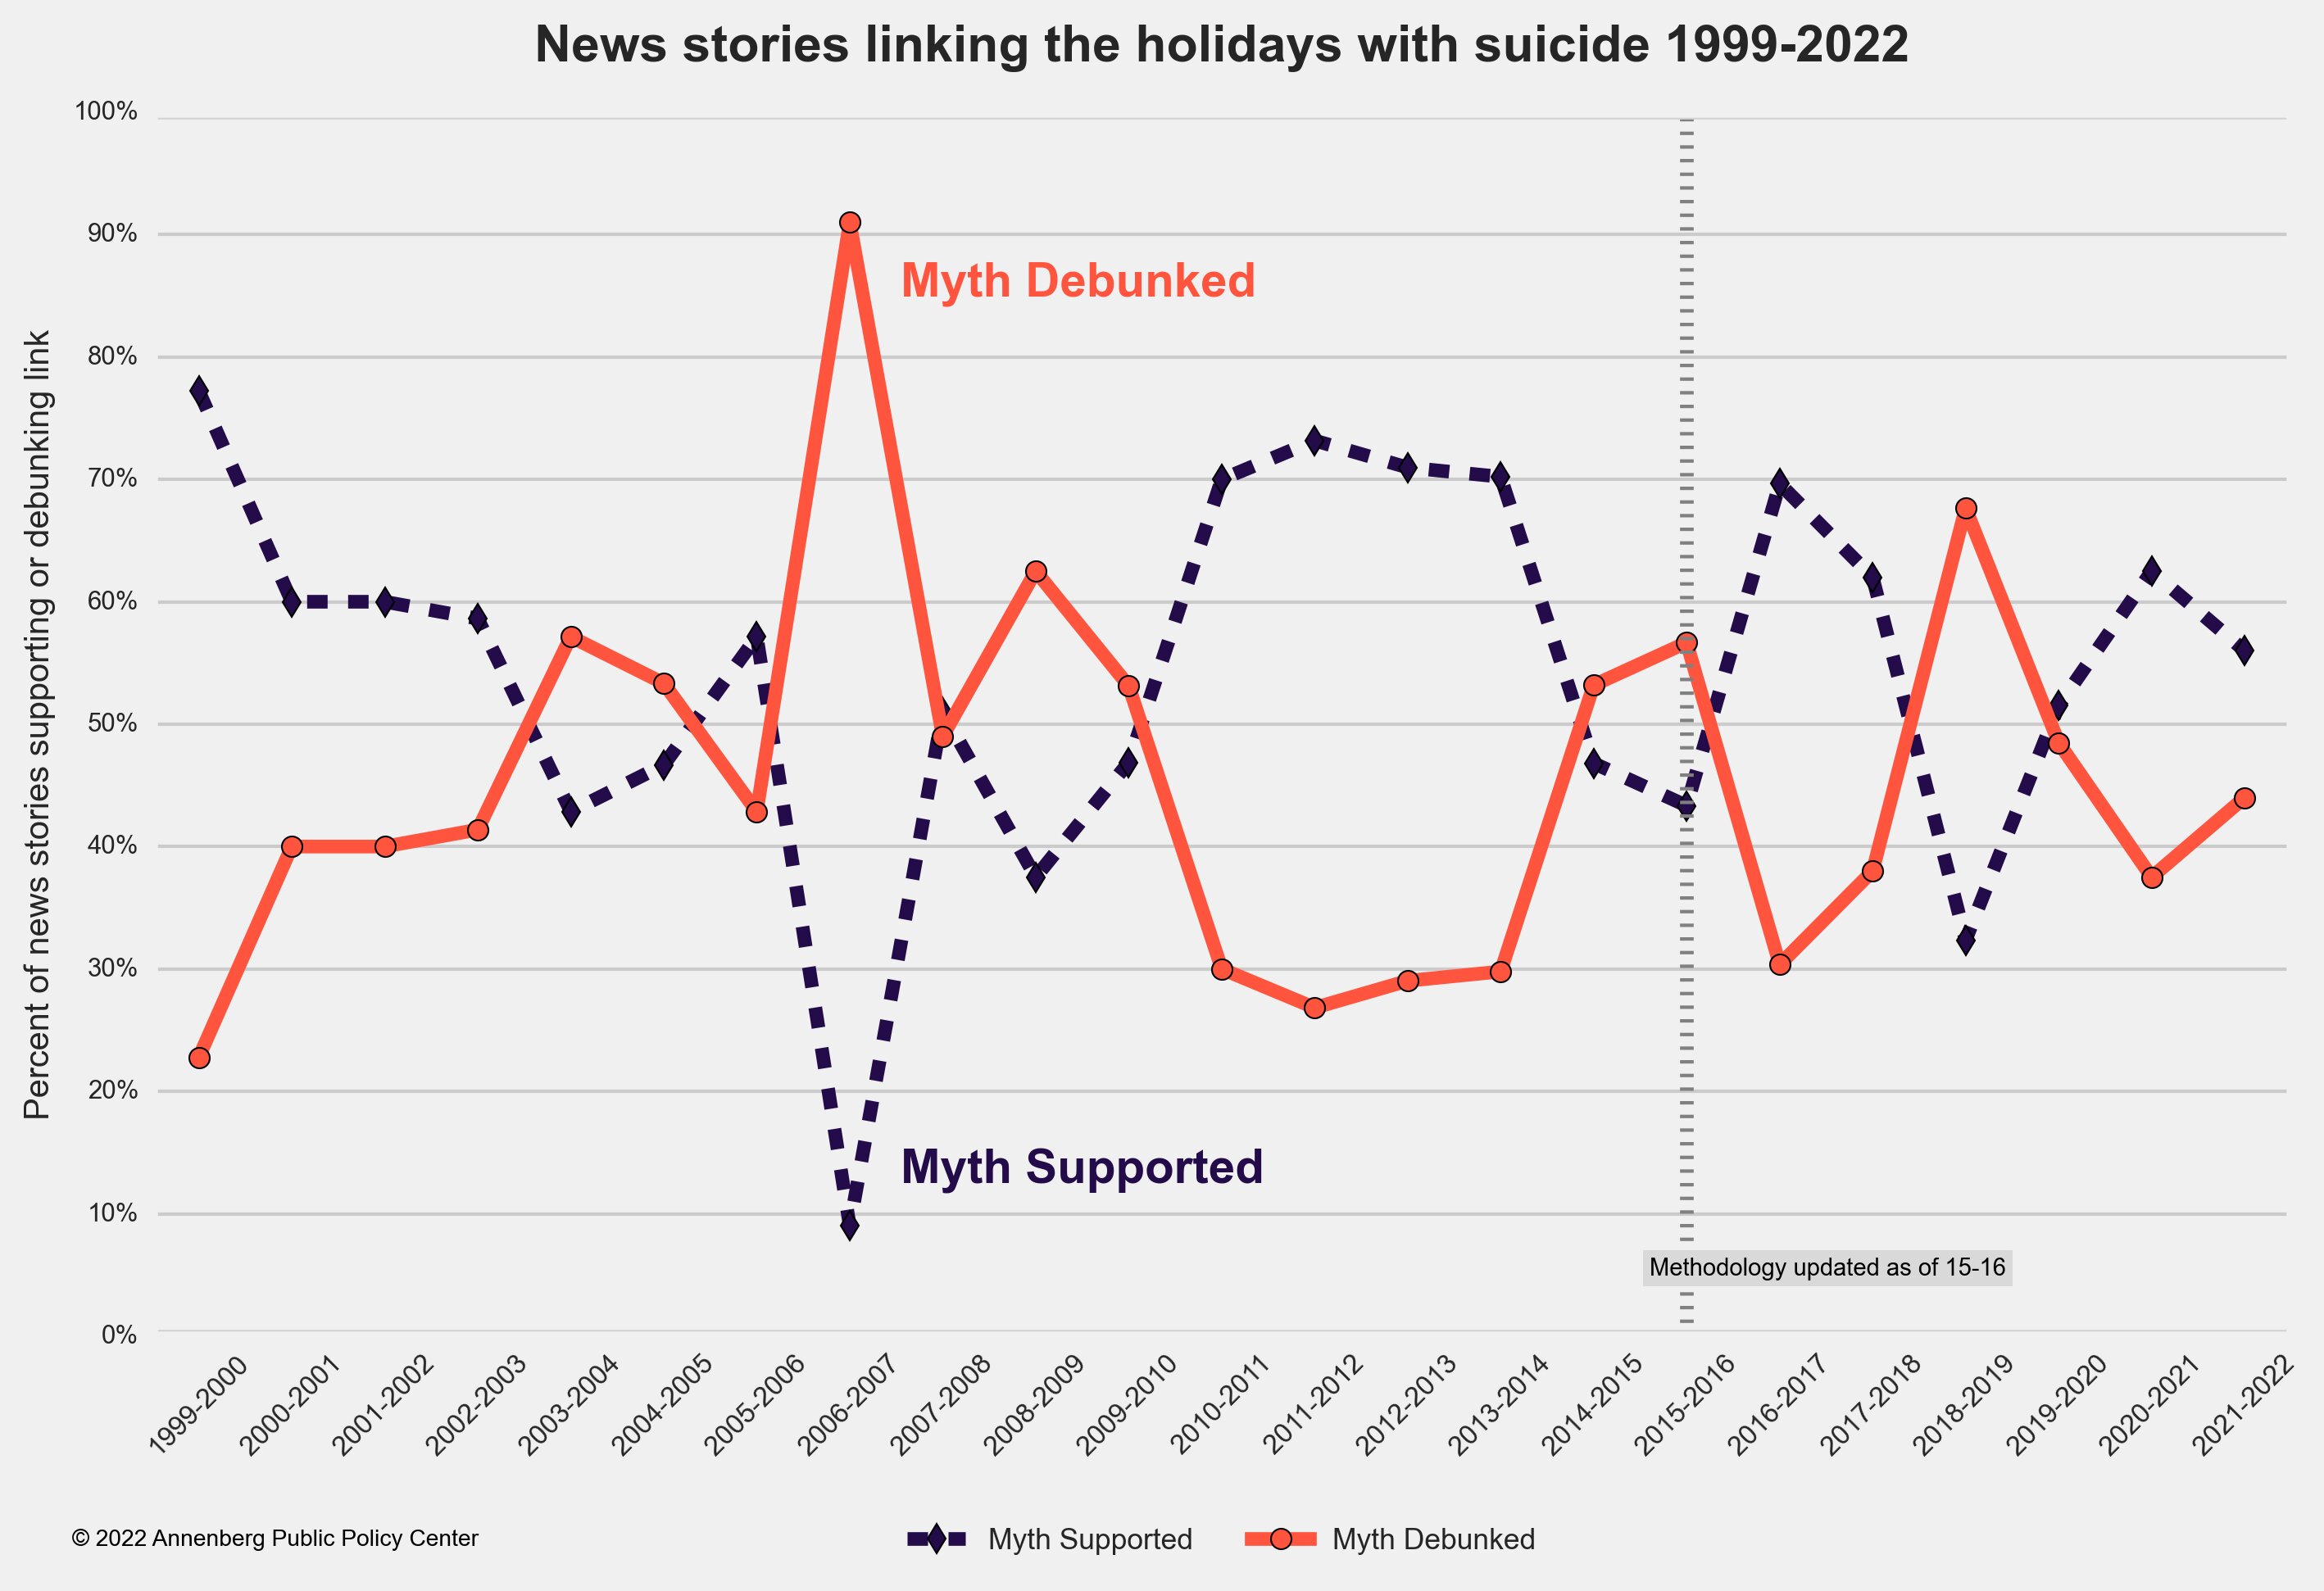 #Some news media stories still inaccurately link suicide with the holiday season